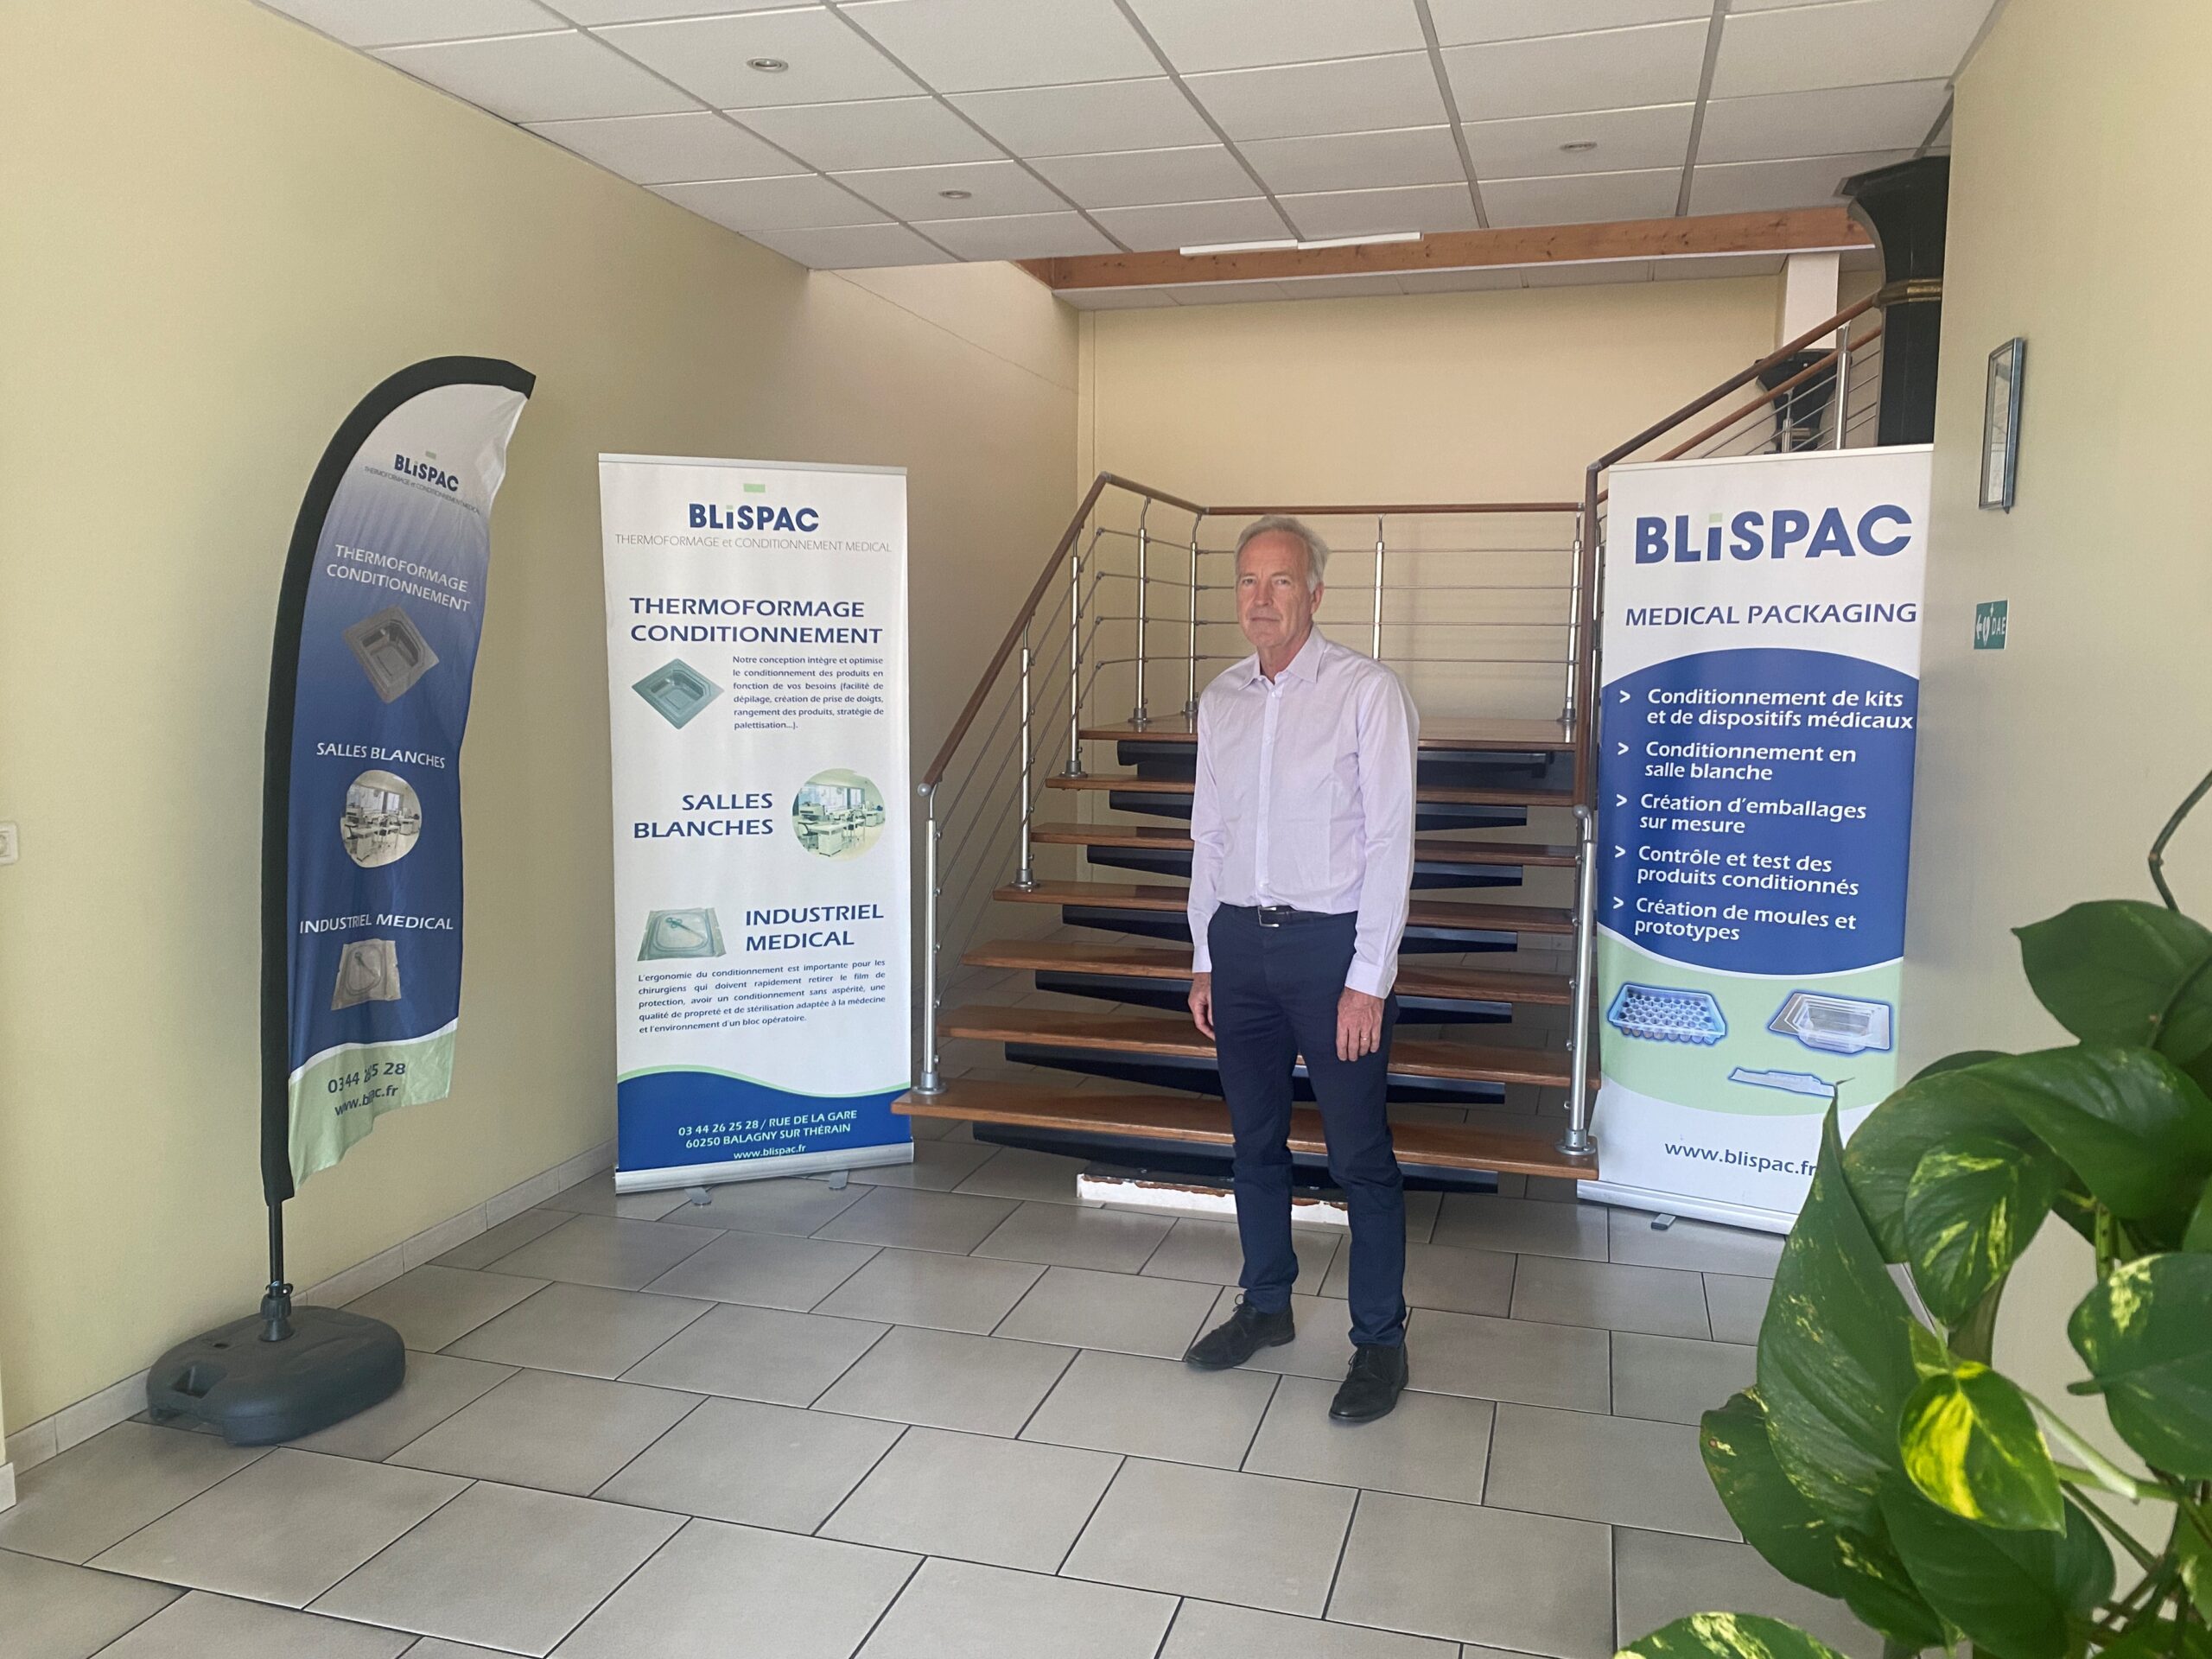 blispac oise hdfid innovation thermoformage conditionnement dispositif médicaux